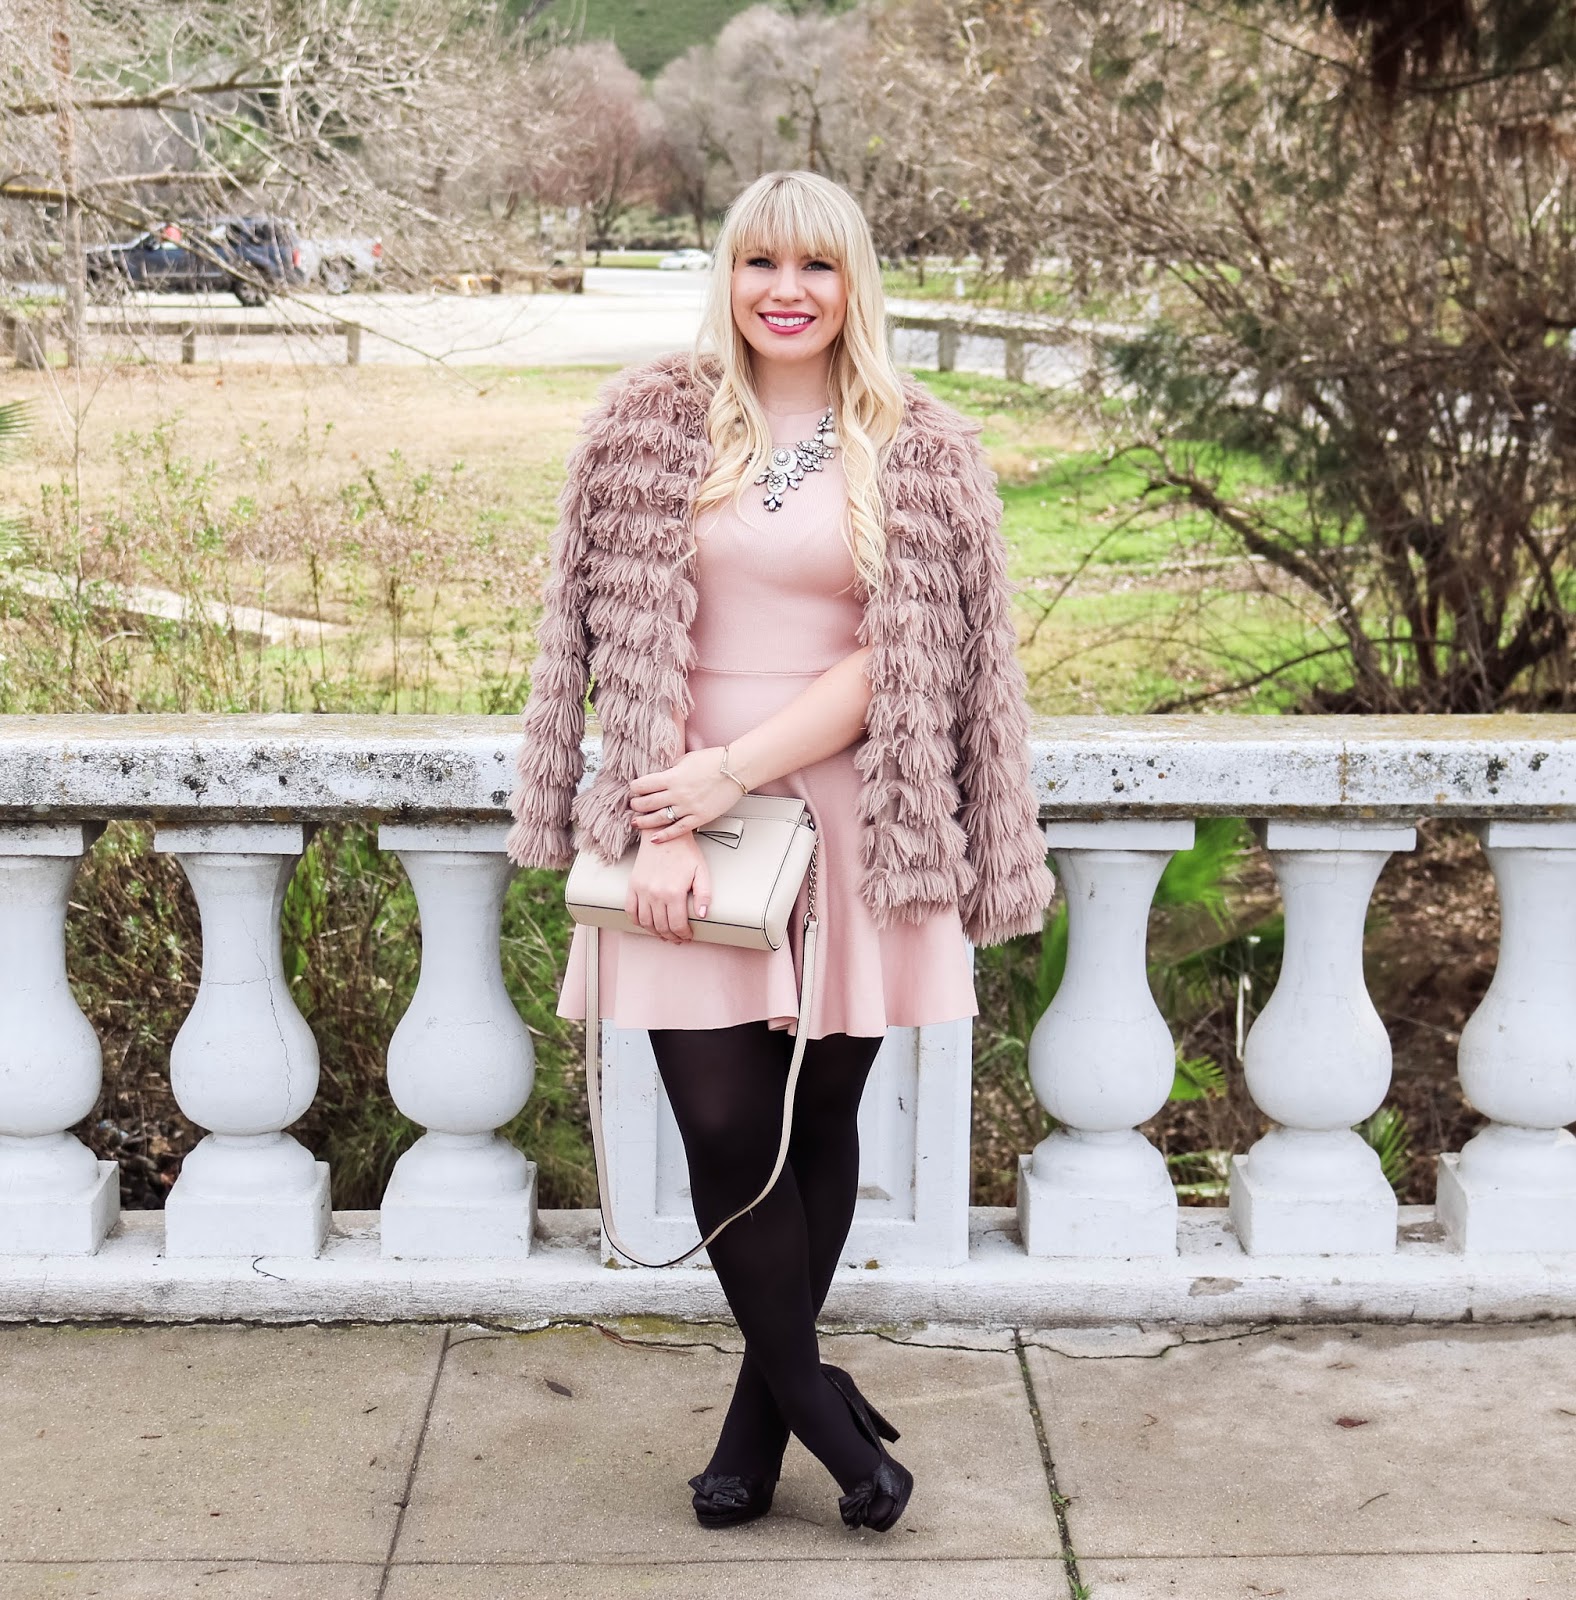 Feminine fashion blogger Lizzie in Lace shares 11 Valentine's Day Outfit Ideas